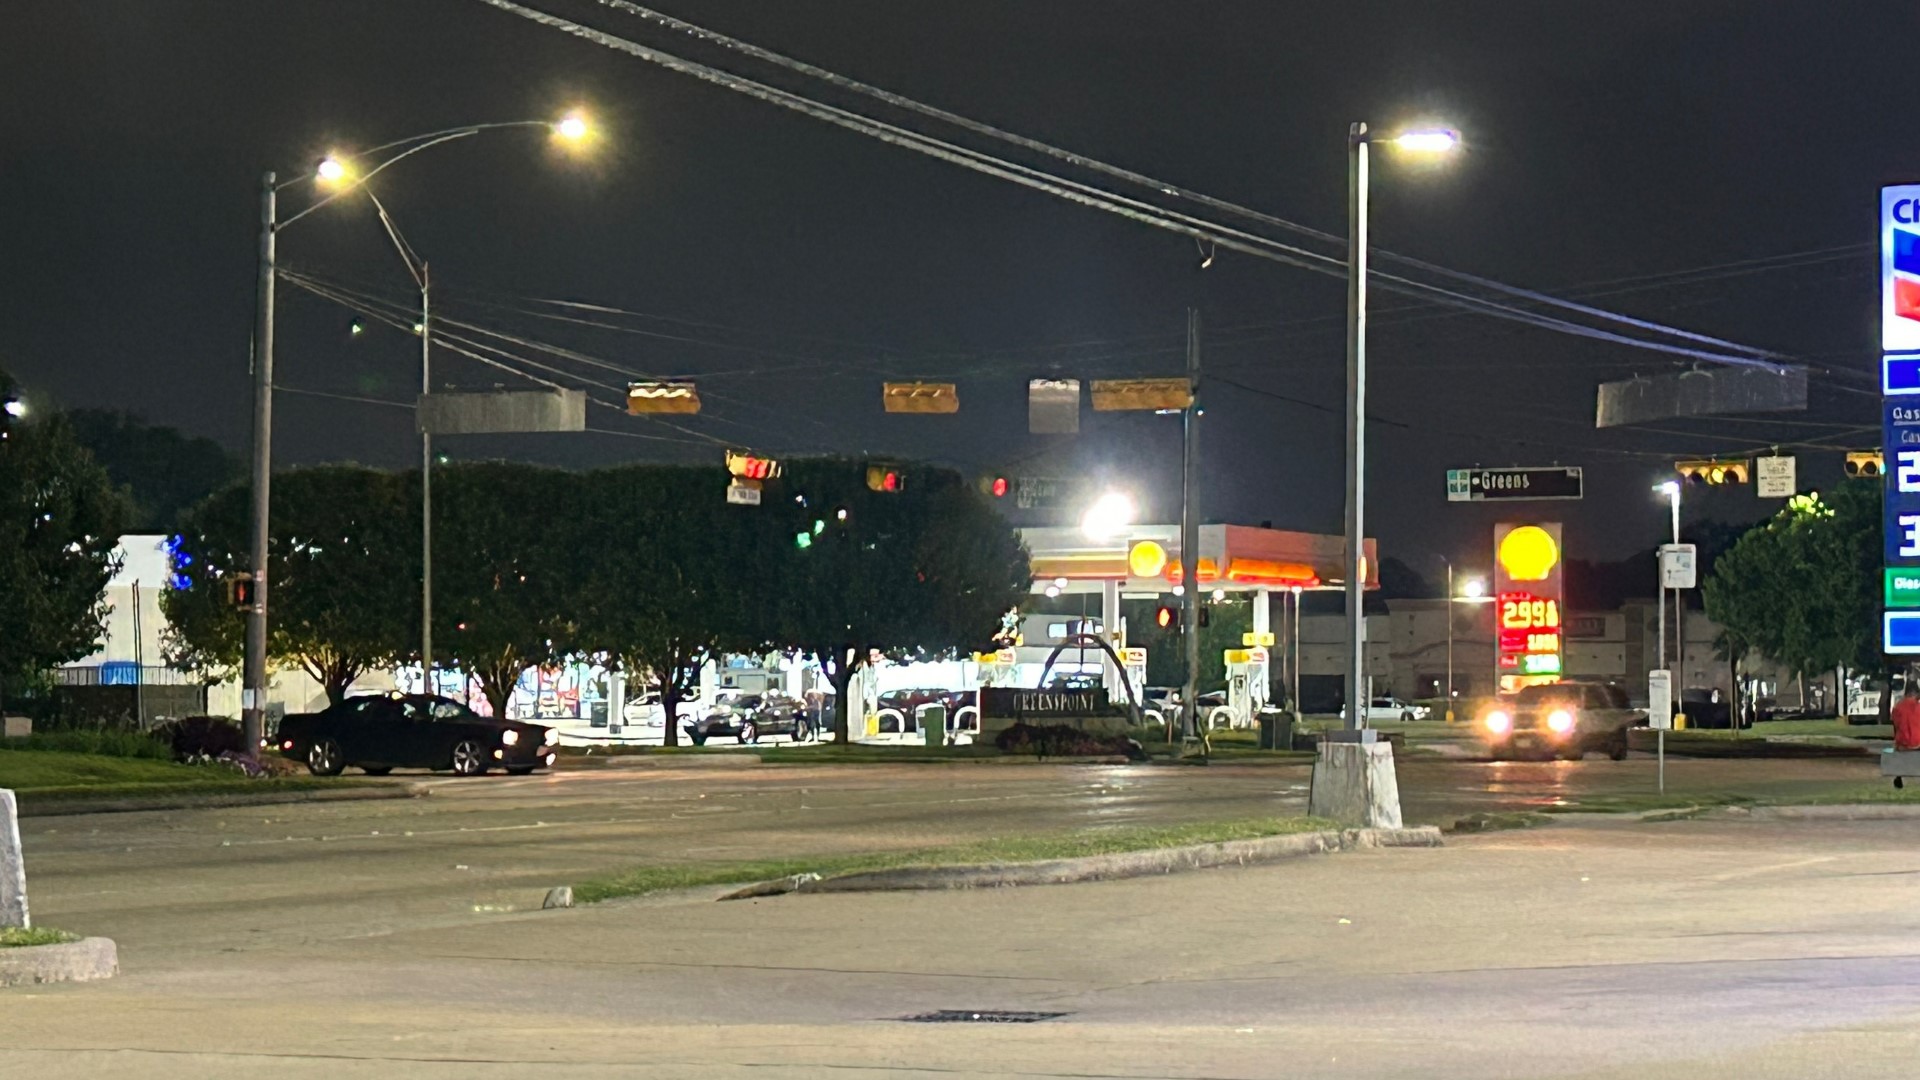 A 5-year-old girl was taken to a hospital in "serious condition" after being hit by a vehicle in north Houston, according to Harris County Sheriff Ed Gonzalez.